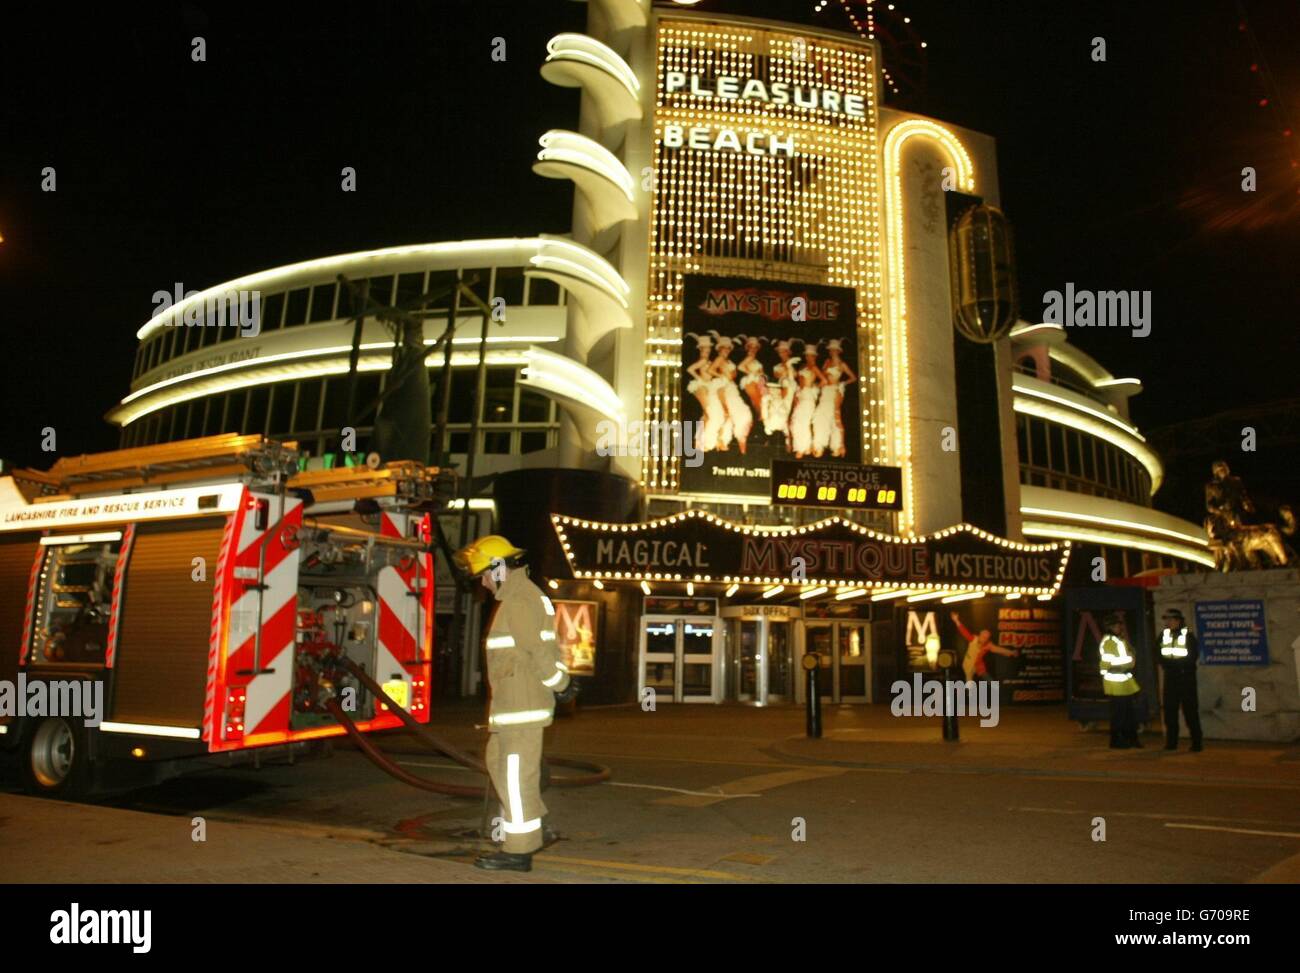 Firefighters at the scene, of a major fire at Blackpool Pleasure Beach. It us understood a number of buildings are on fire within the leisure complex. A spokeswoman for Lancashire Fire Service said they received an emergency call just before 9.30pm. She said a number of buildings were 'well alight'. Stock Photo